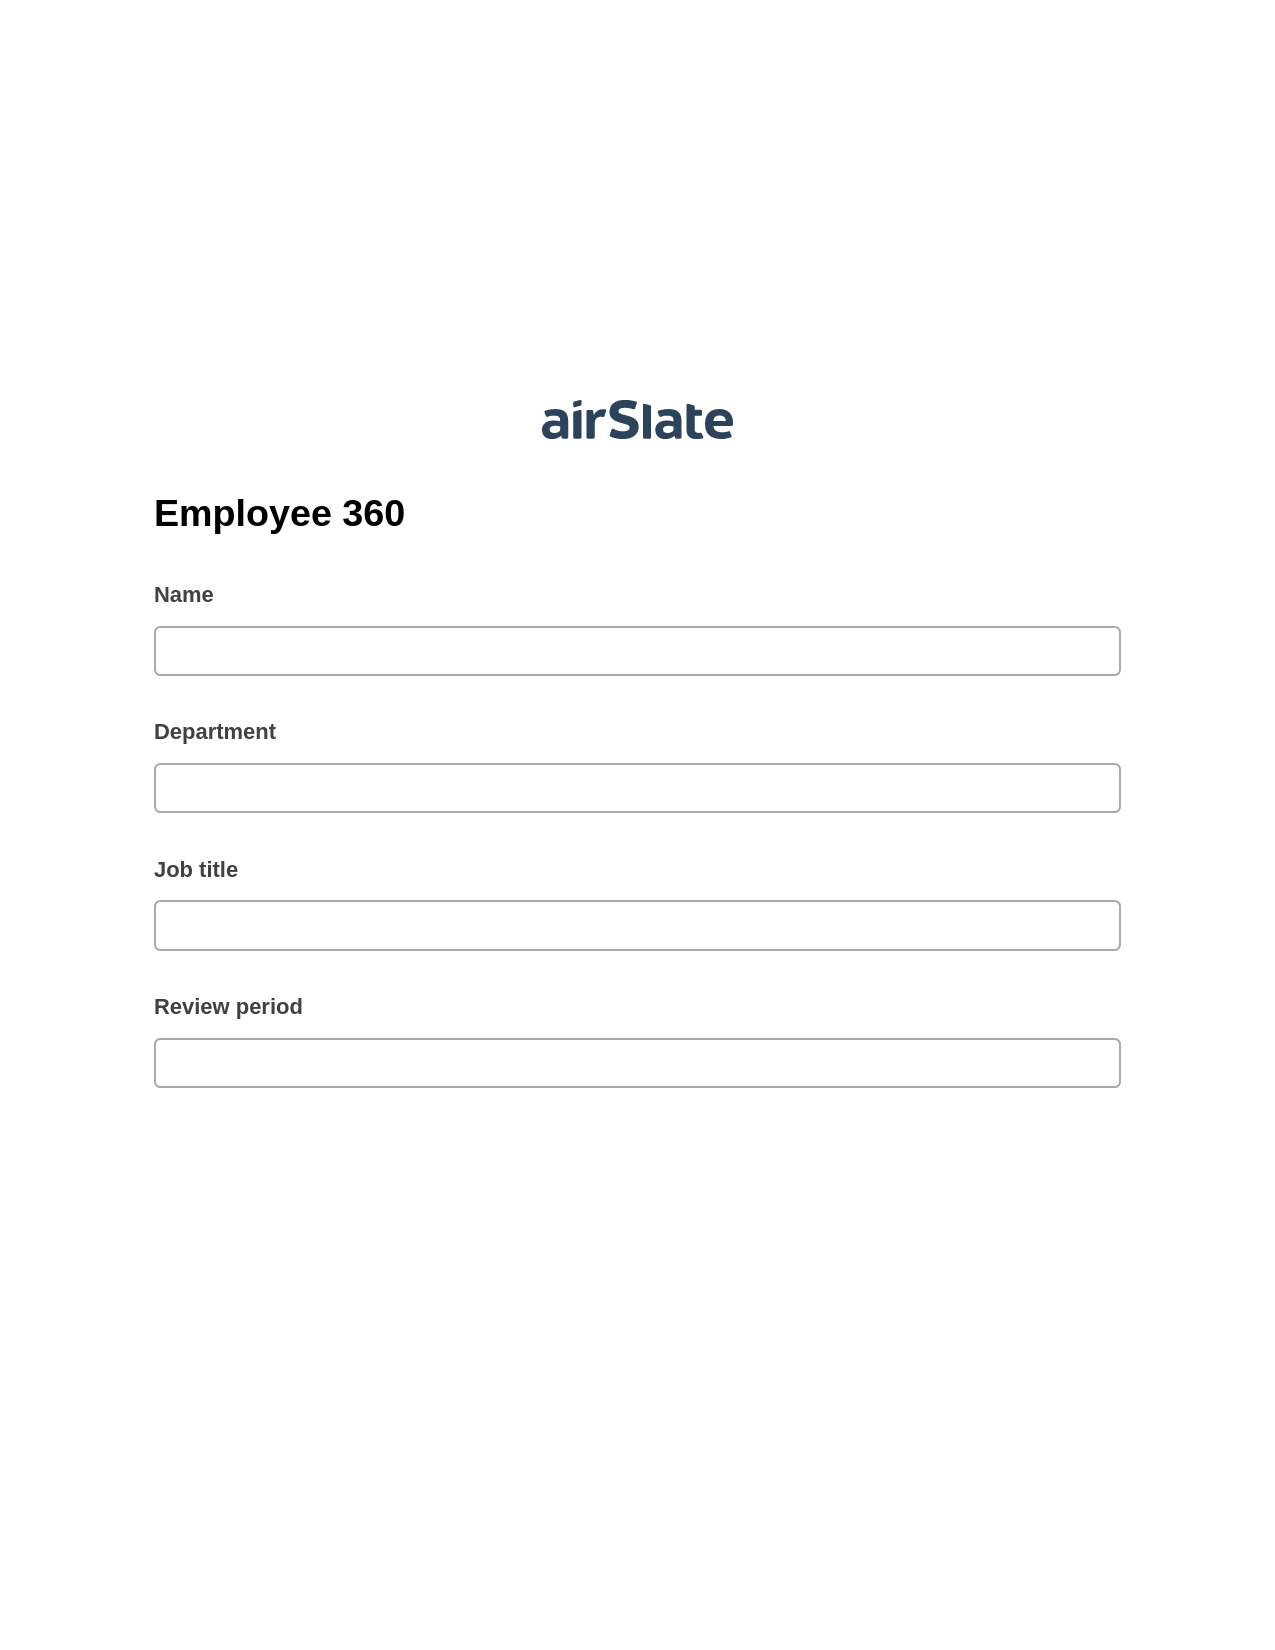 Employee 360 Pre-fill from Salesforce Records with SOQL Bot, Email Notification Bot, Archive to SharePoint Folder Bot